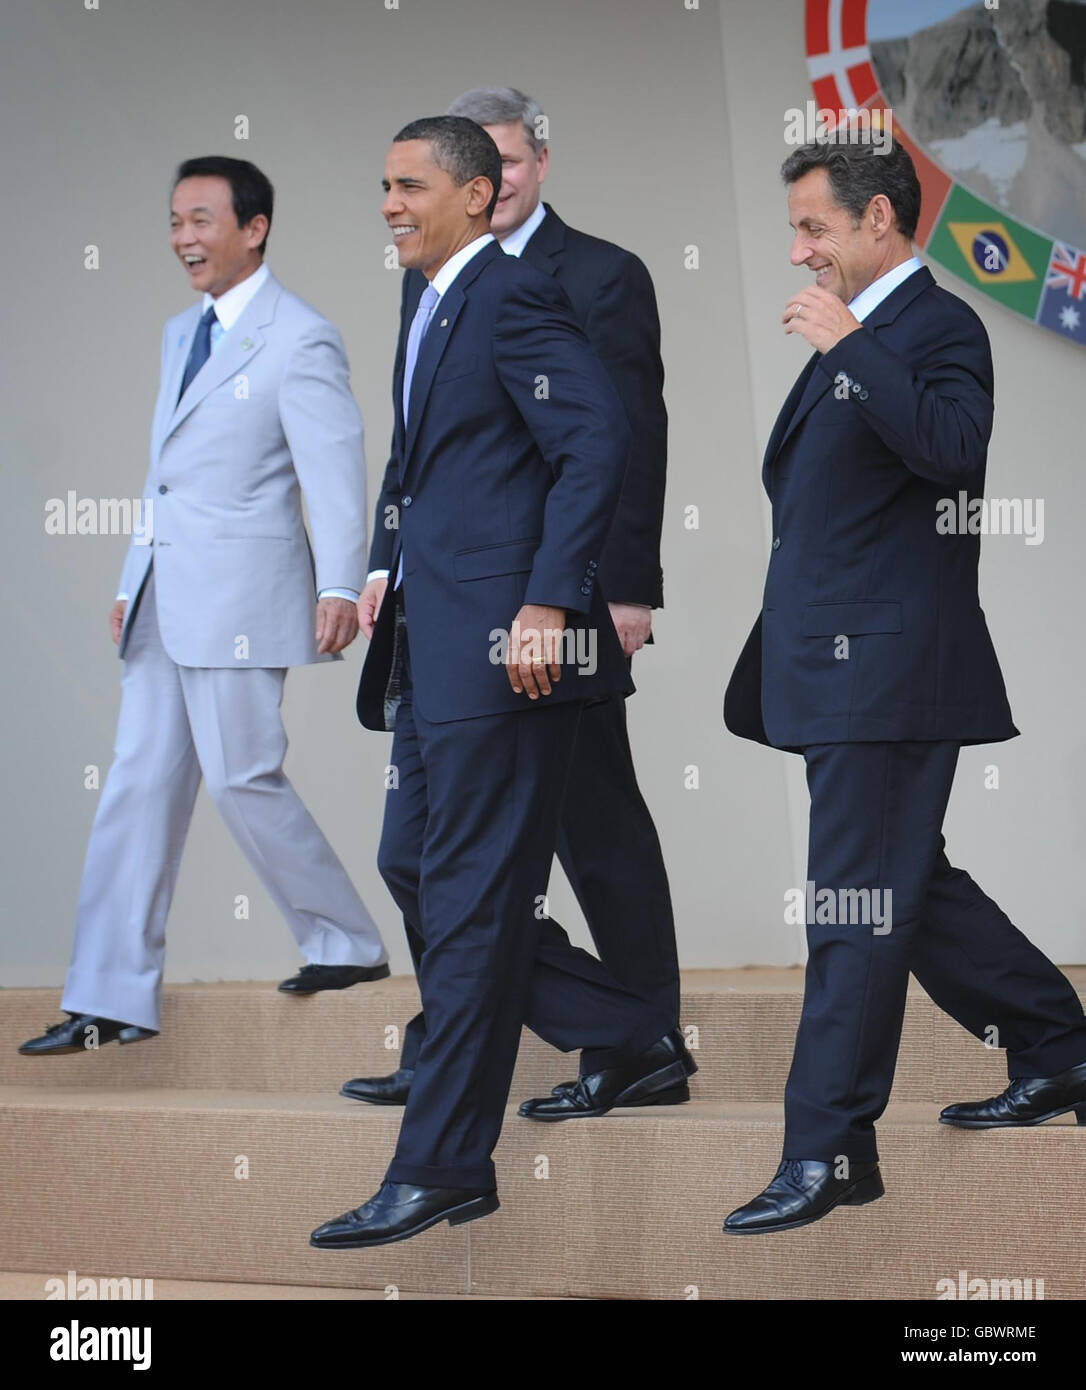 G8 leaders leave the stage after posing for their family photo (from left to right) Japanese Prime Minister Taro Aso, President of the USA Barack Obama, Canadian Prime Minister Stephen Harper, French President Nicolas Sarkozy at the G8 Summit in L'Aquila today. Stock Photo